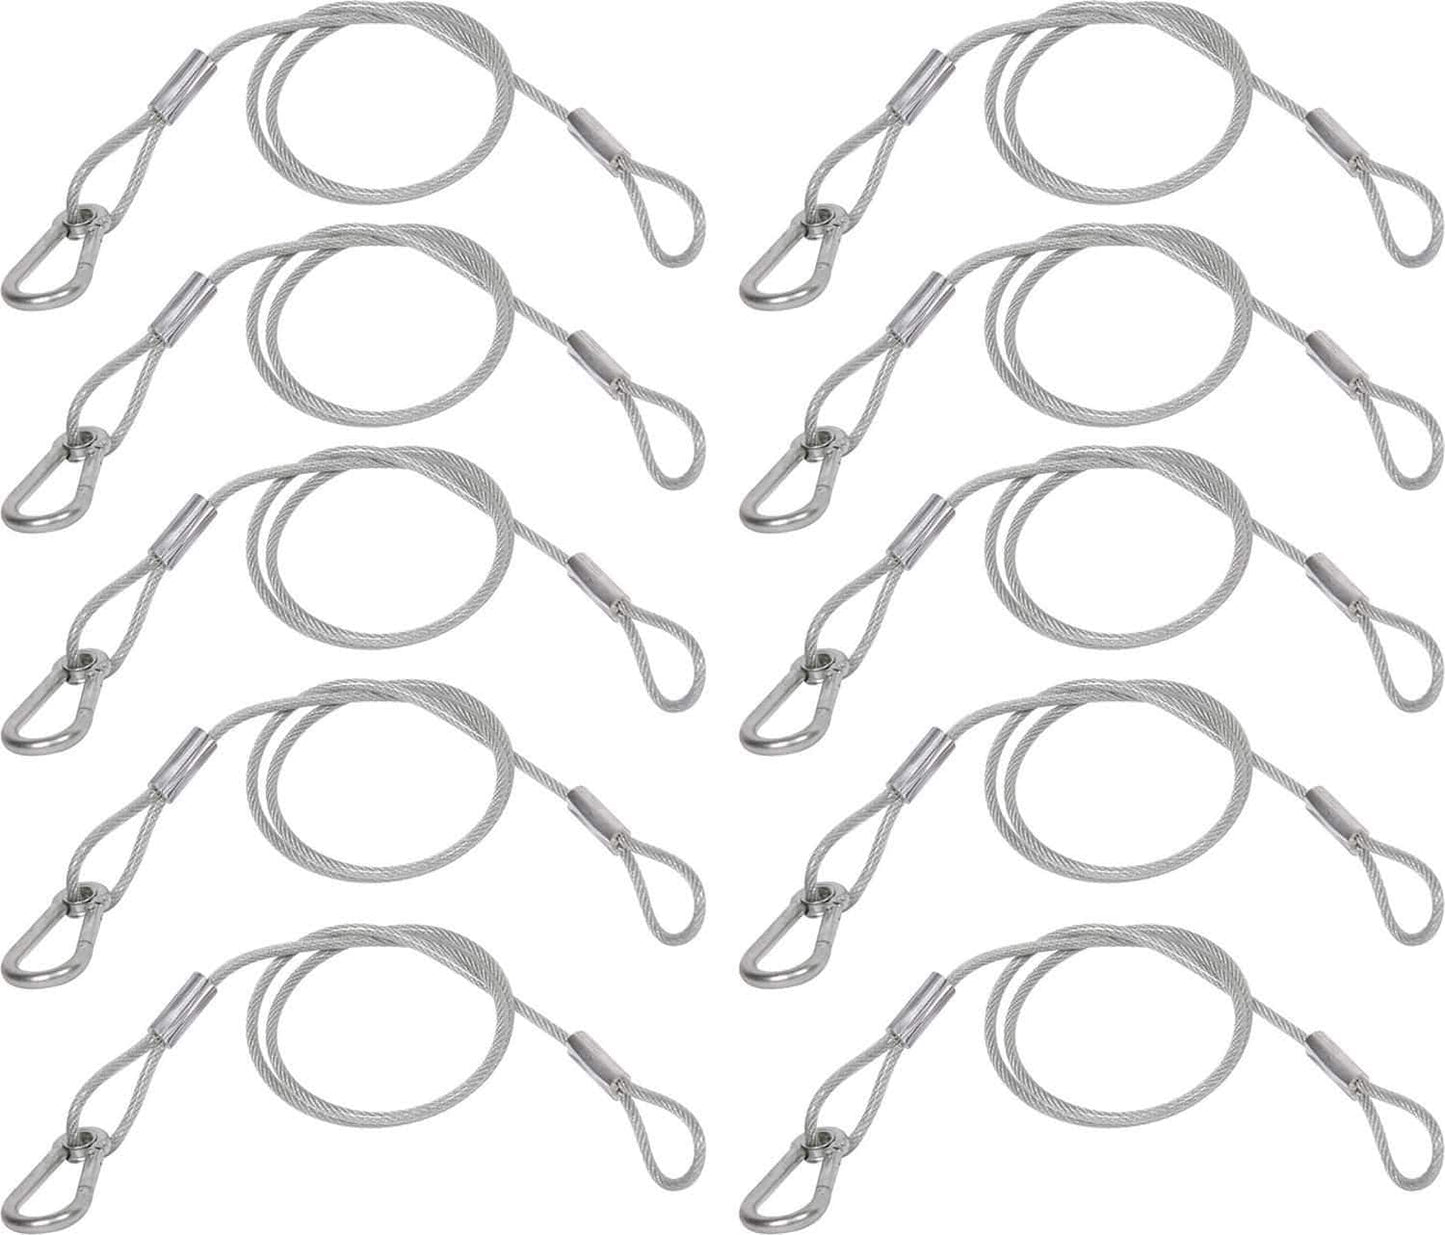 Solena Professional Lighting Safety Cable 10-Pack - ProSound and Stage Lighting